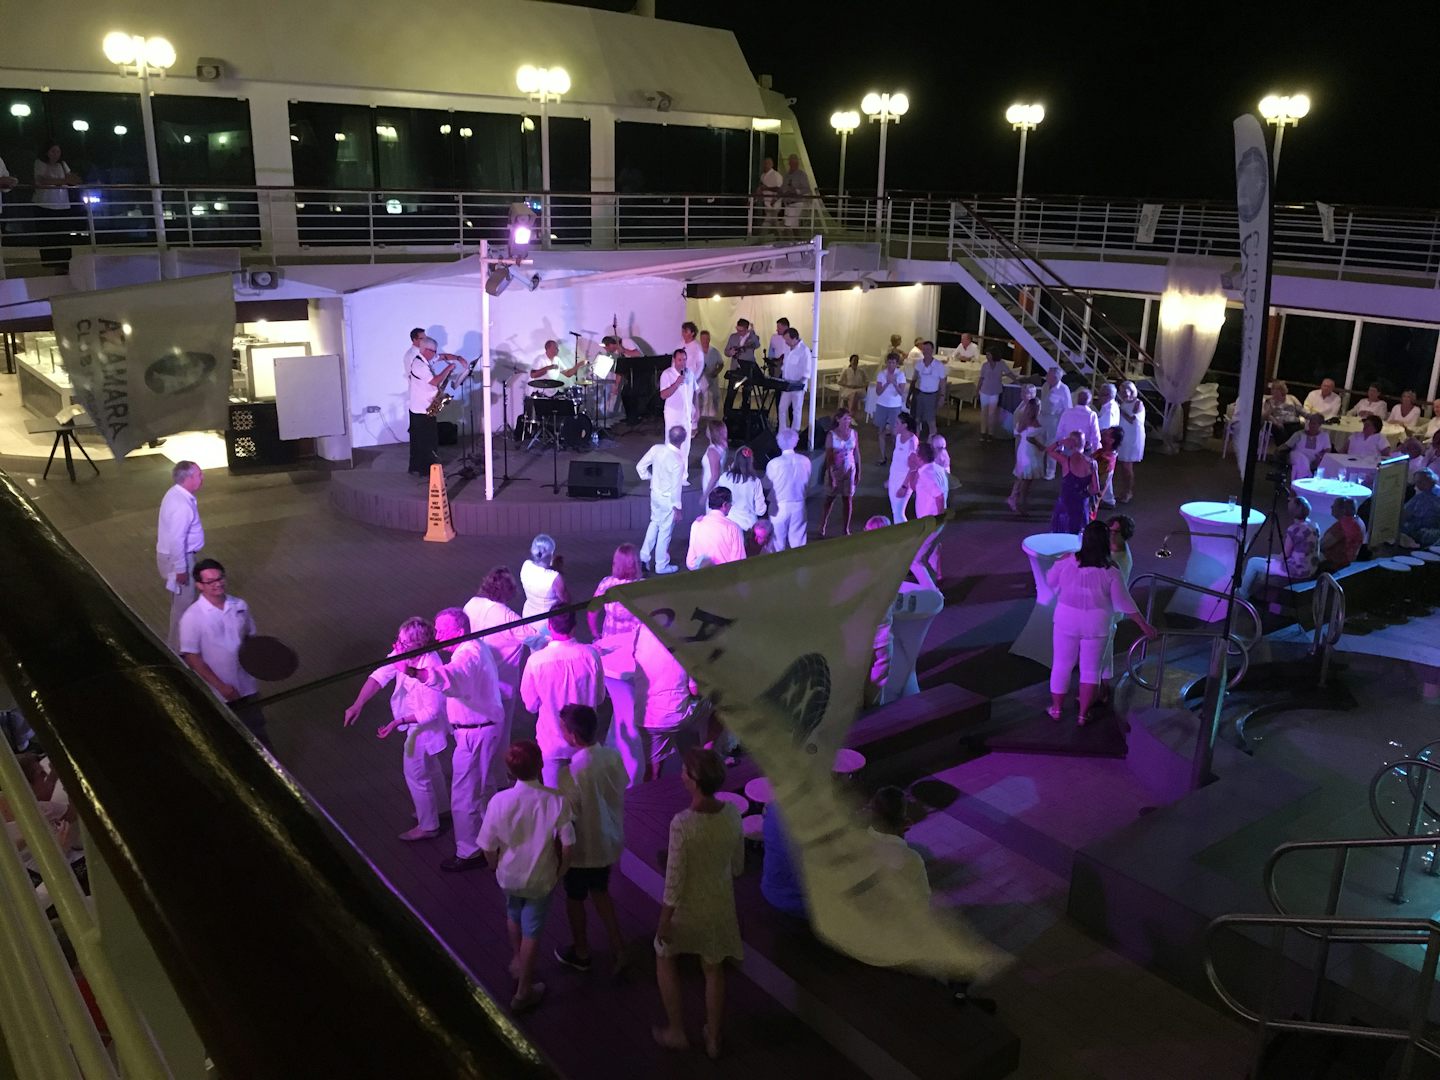 White Night party on deck